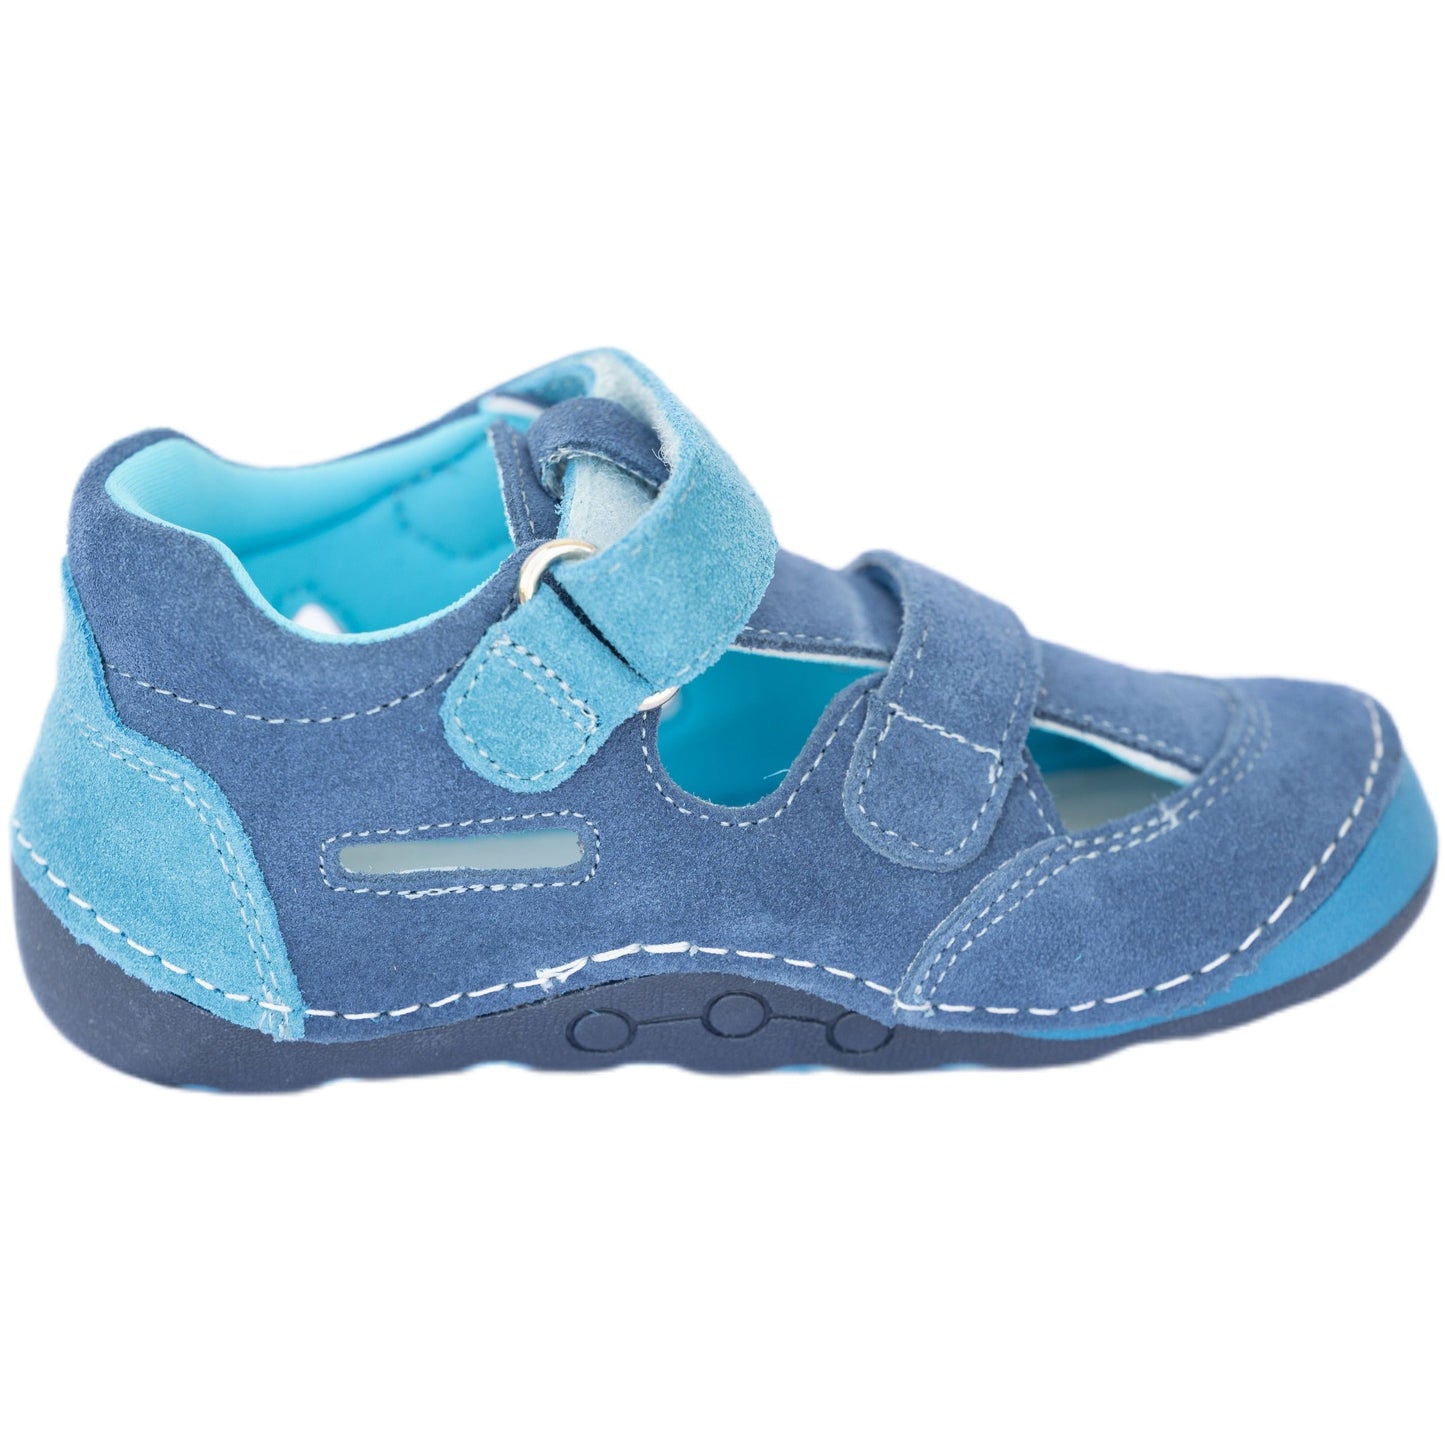 Minimalist barefoot sneakers for toddler boys are comfortable genuine leather shoes suitable for active boys, who run a lot on natural surfaces.